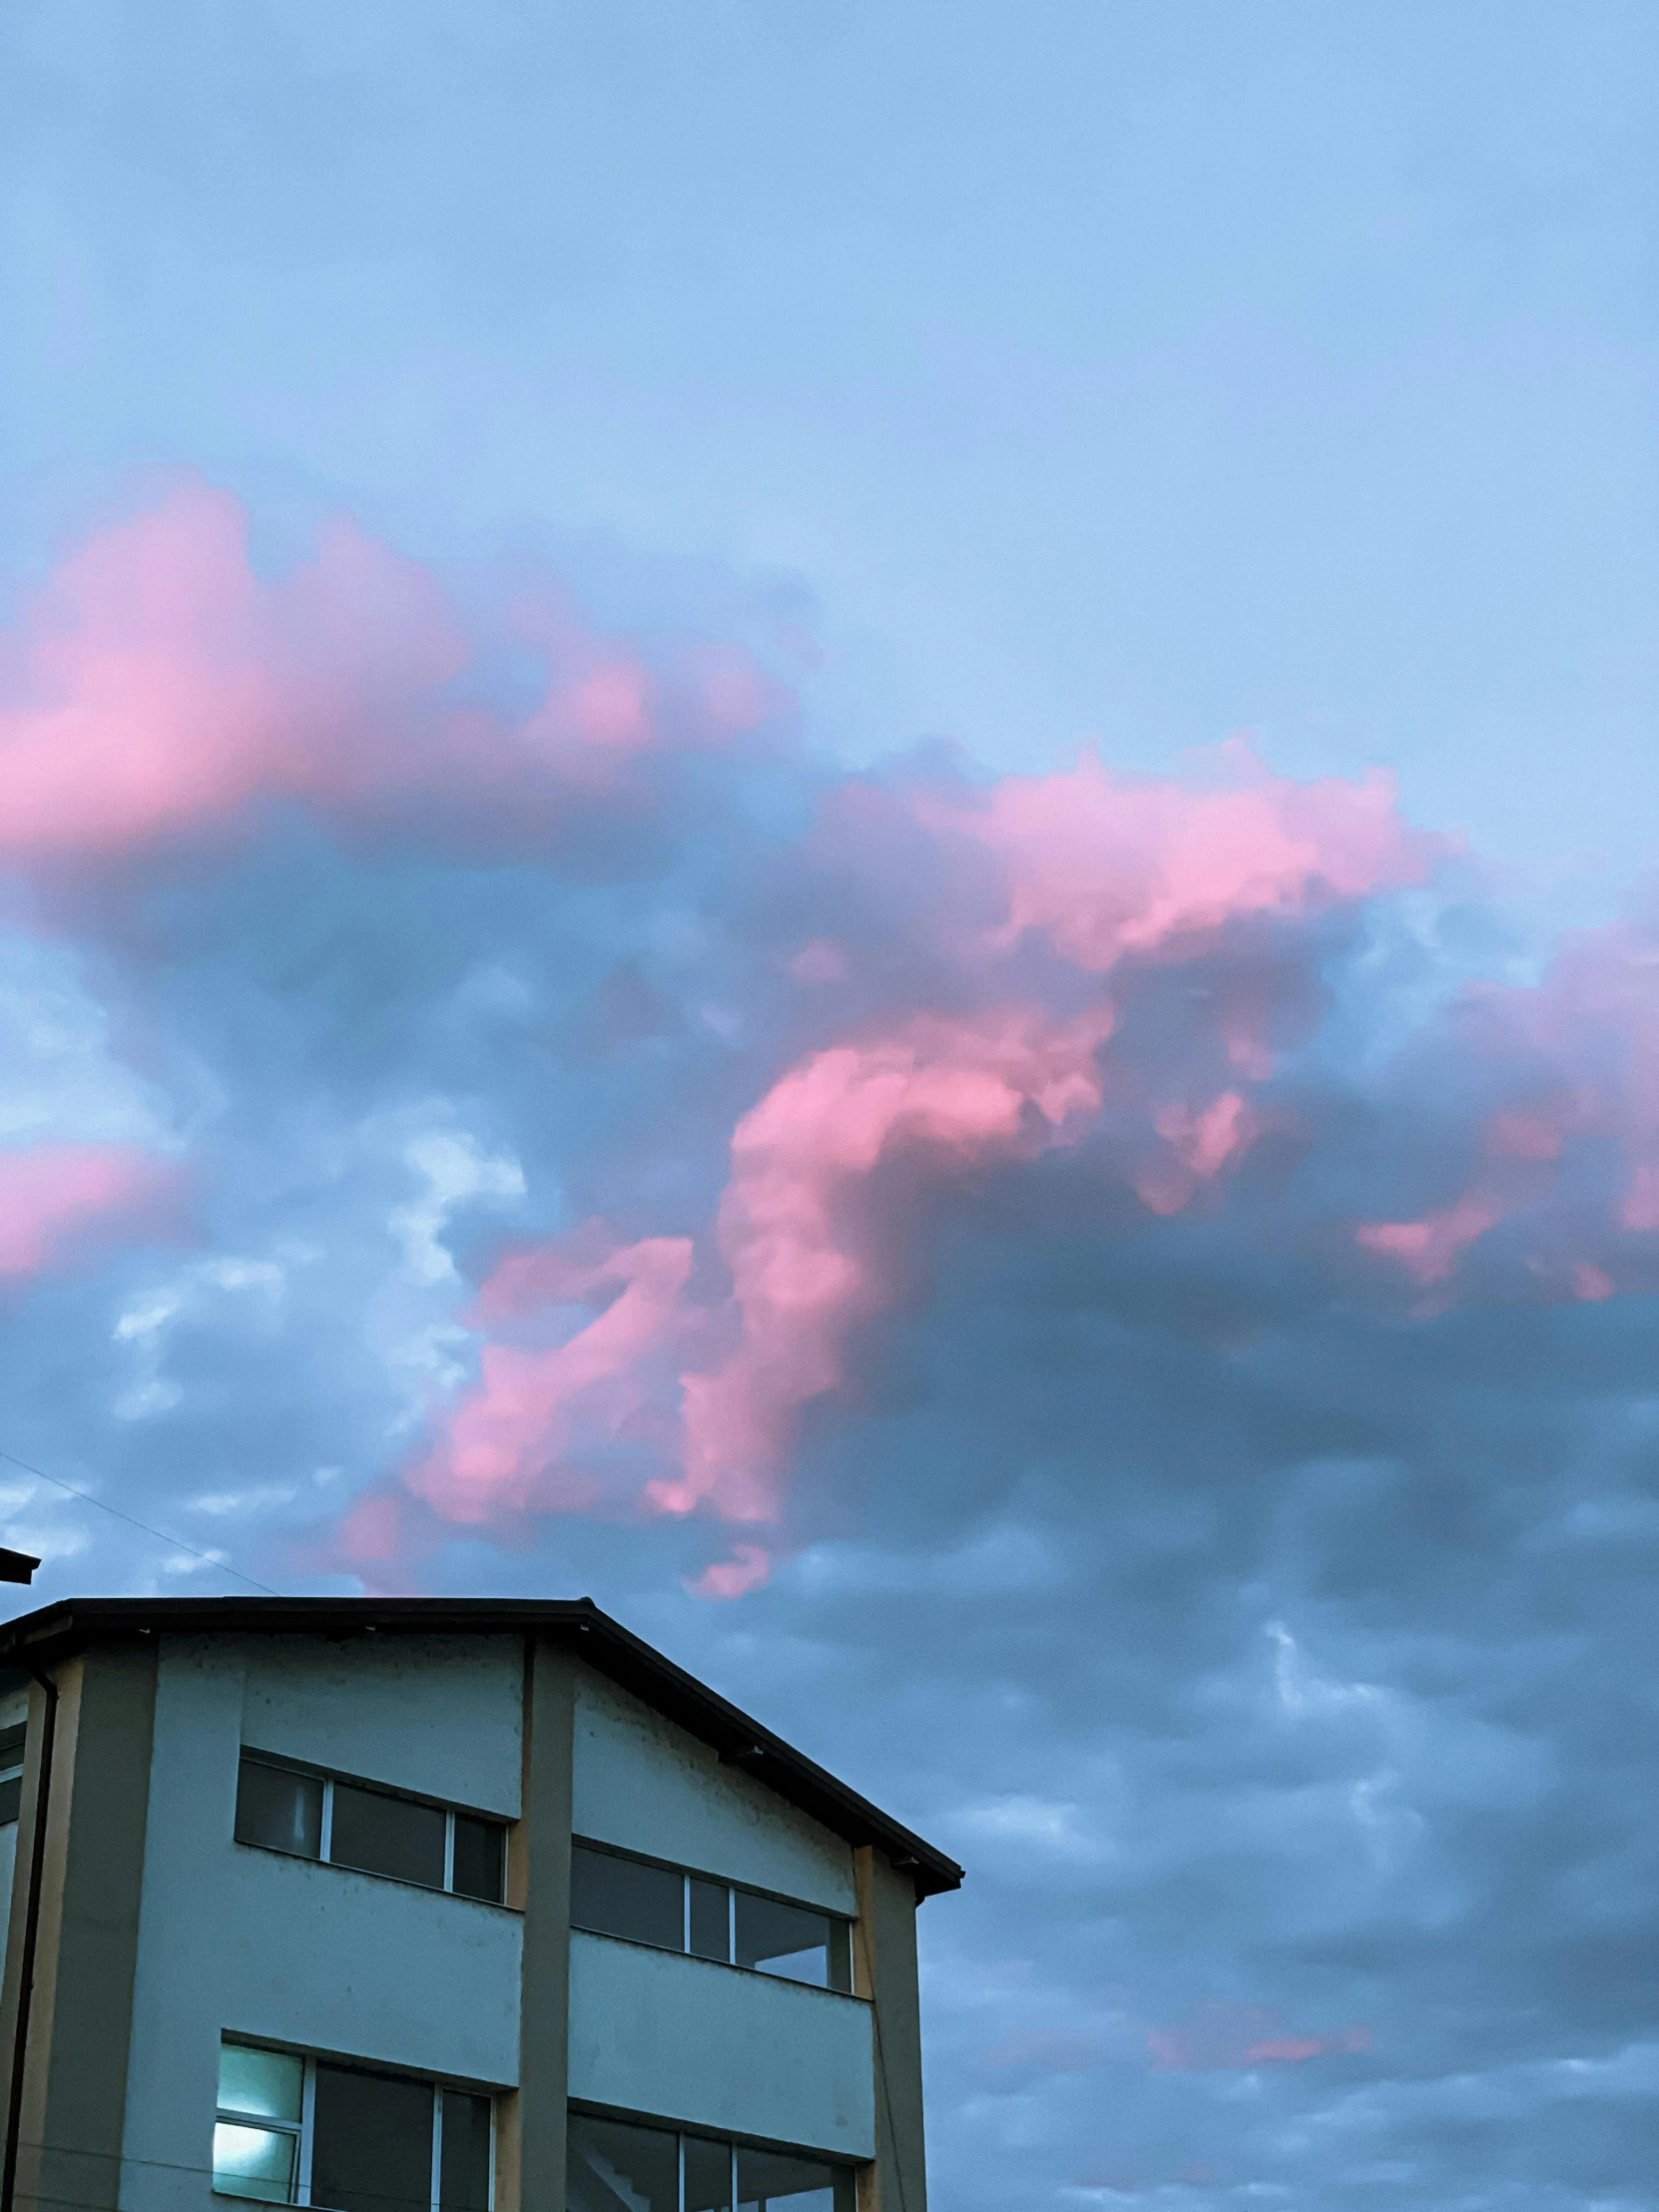 a clock tower on top of a building under a cloudy sky, an album cover, by Alexis Grimou, unsplash, aestheticism, made of cotton candy, ☁🌪🌙👩🏾, late summer evening, cloud day